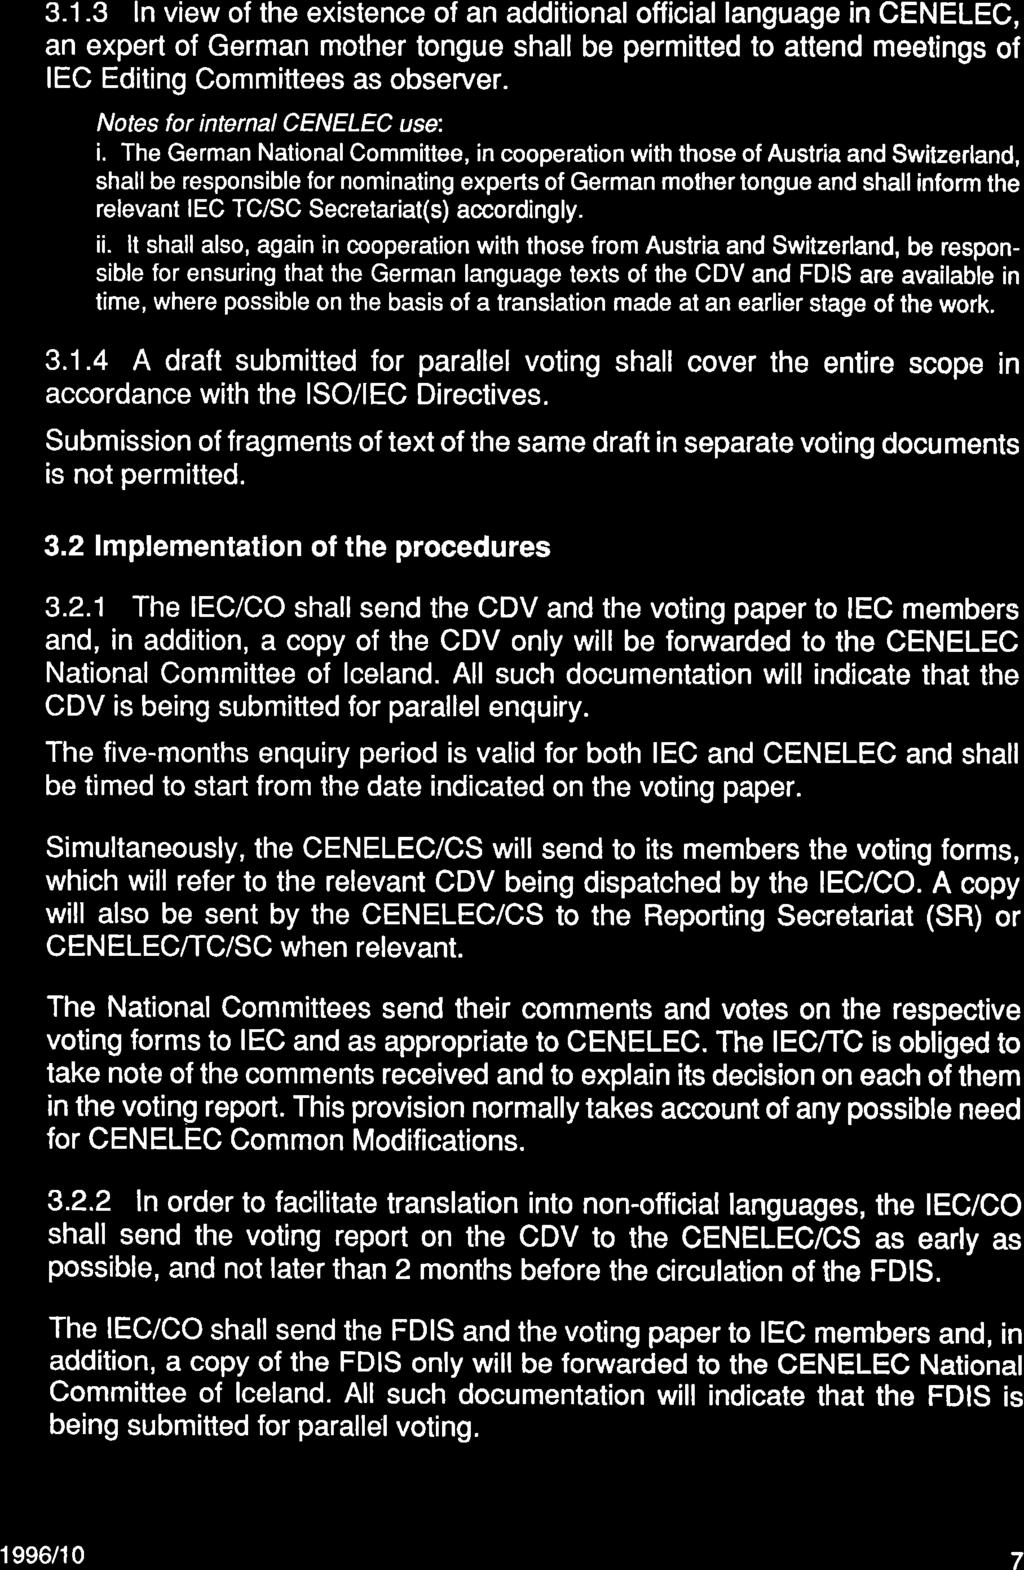 3.1.3 ln view of the existence of an additional official language in CENELEC, an expert of German mother tongue shall be permitted to attend meetings of IEC Editing Committees as observer.